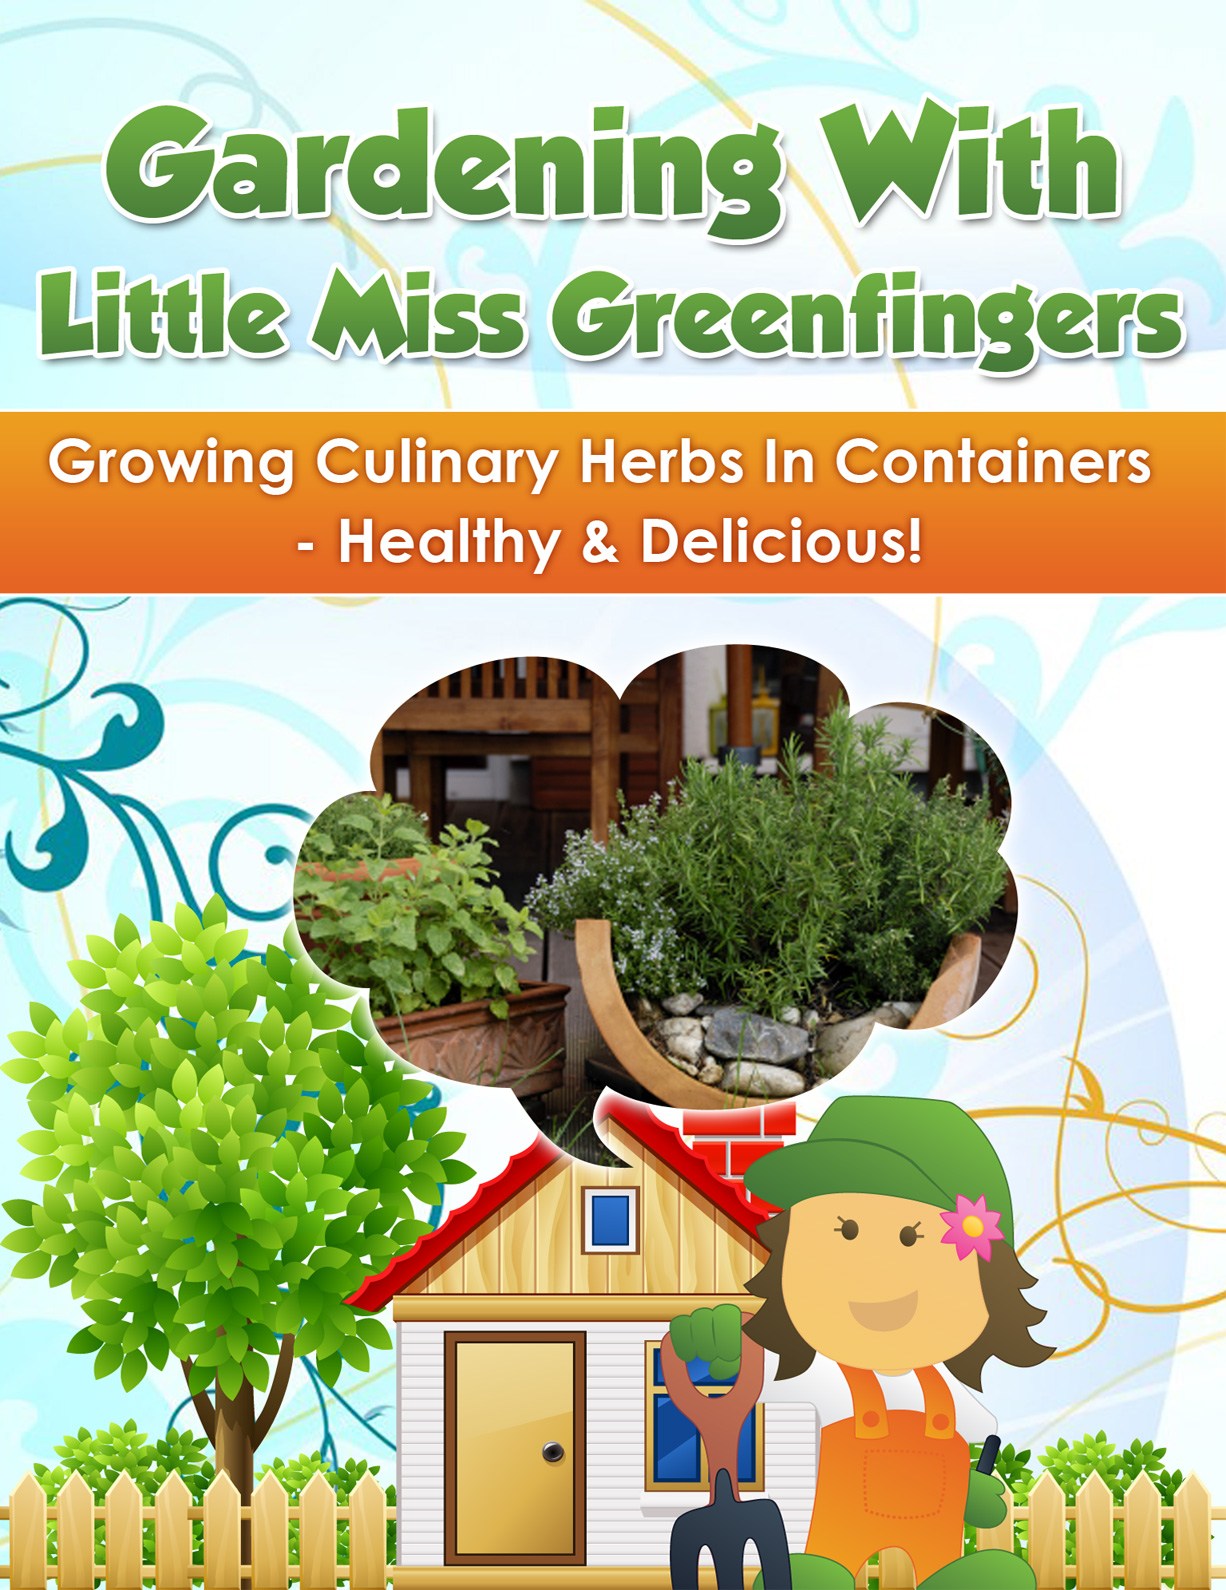 How to Grow Culinary Herbs In Containers Indoors and Outdoors – ebook Review